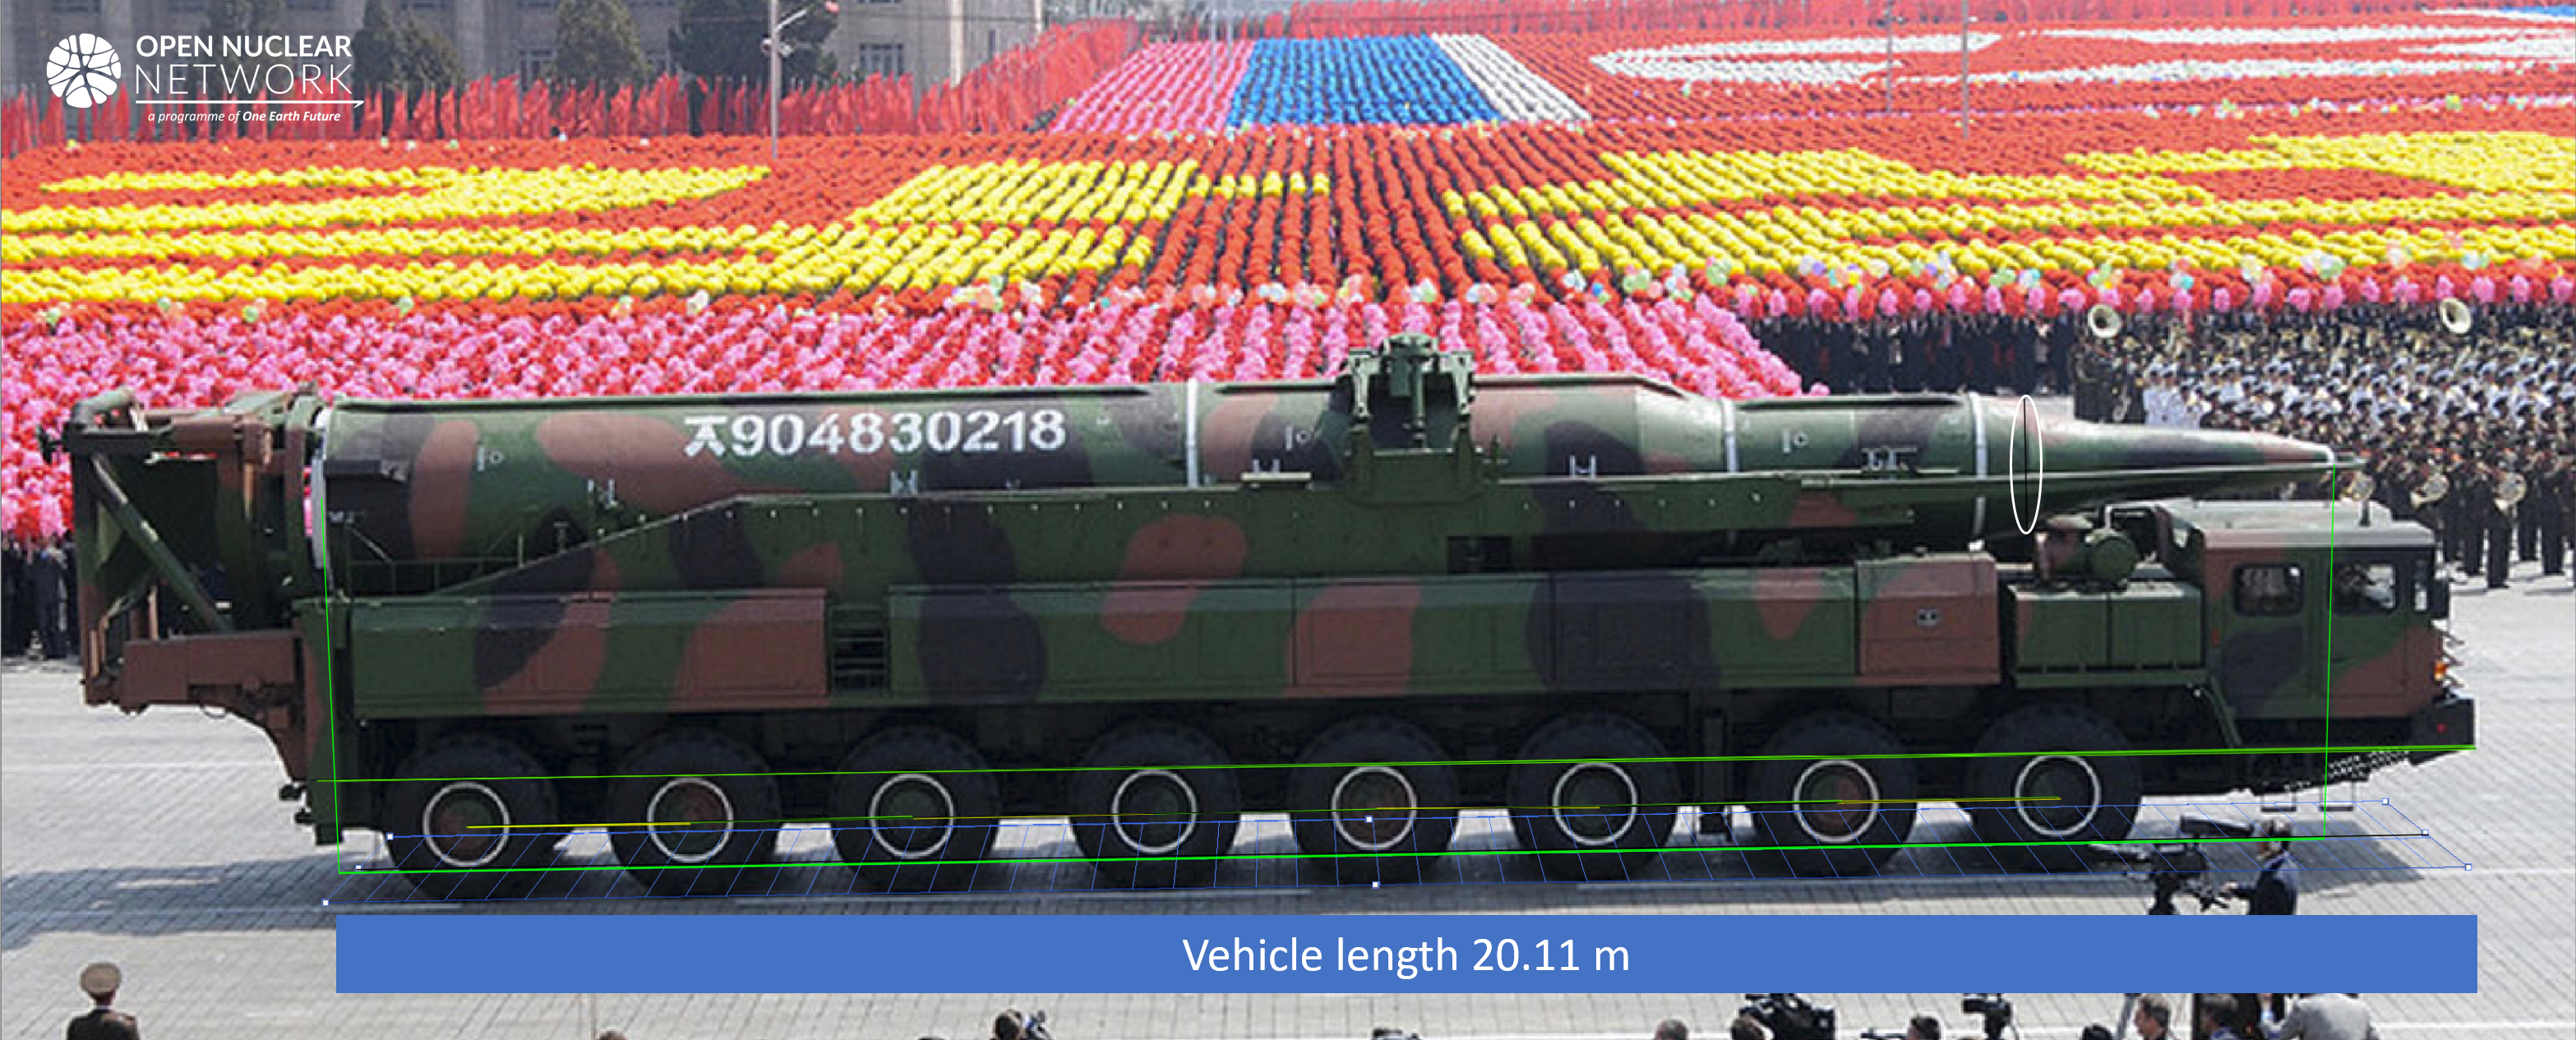 Figure 7. Using stated length of WS51200 truck as reference, approximate length of the missile and base diameter of its re-entry vehicle could be measured. Image: KCNA/US Navy Institute